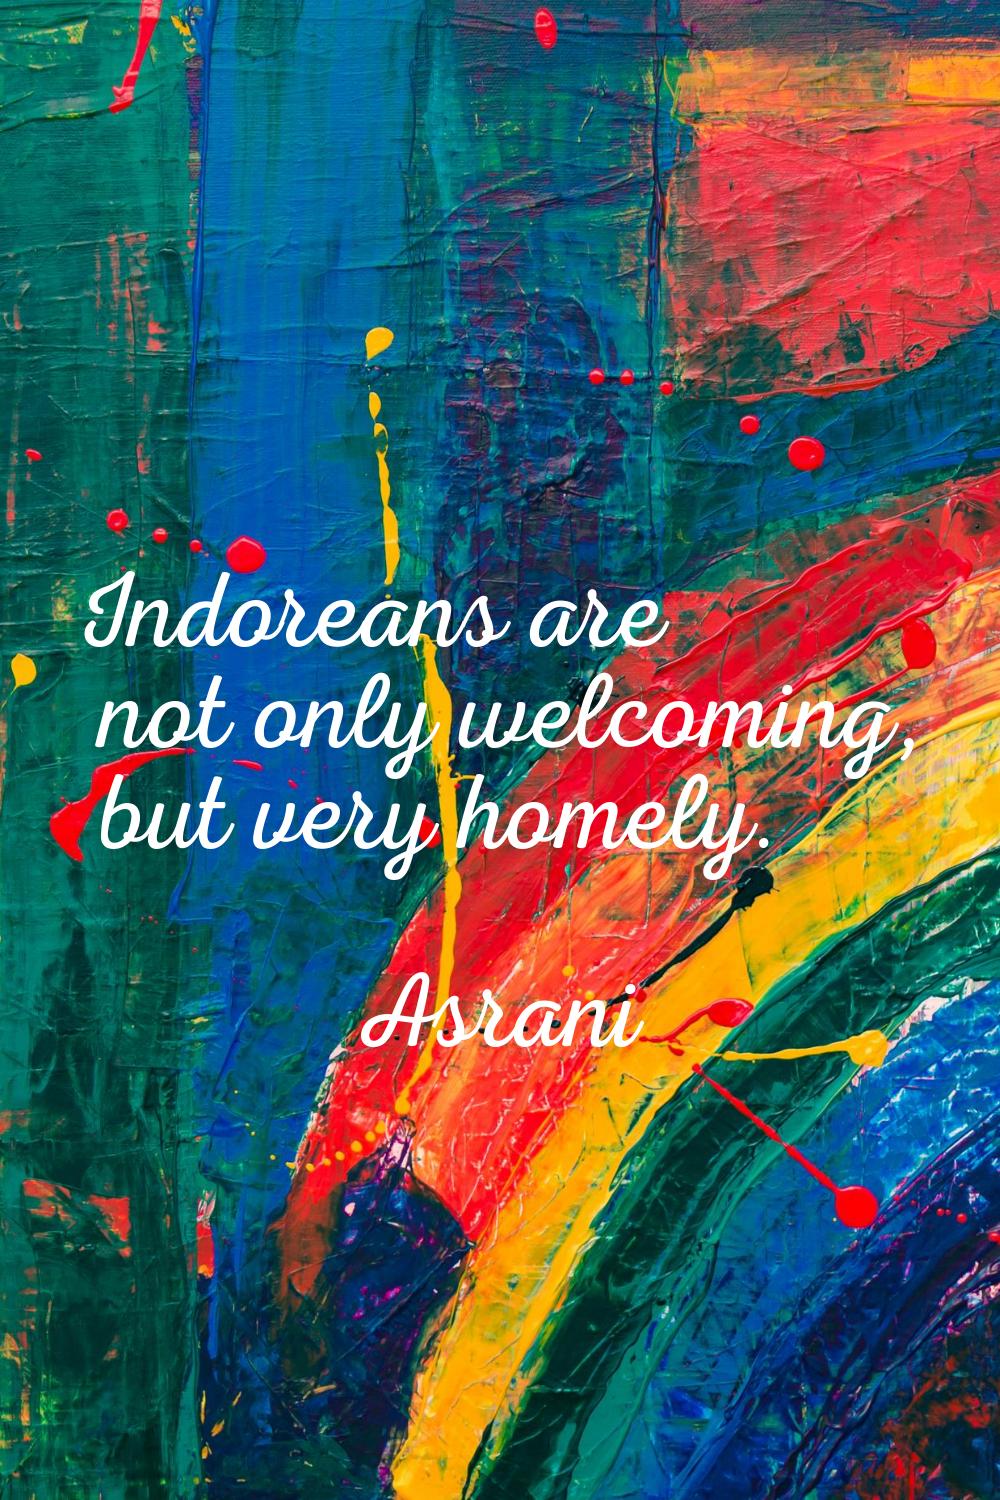 Indoreans are not only welcoming, but very homely.